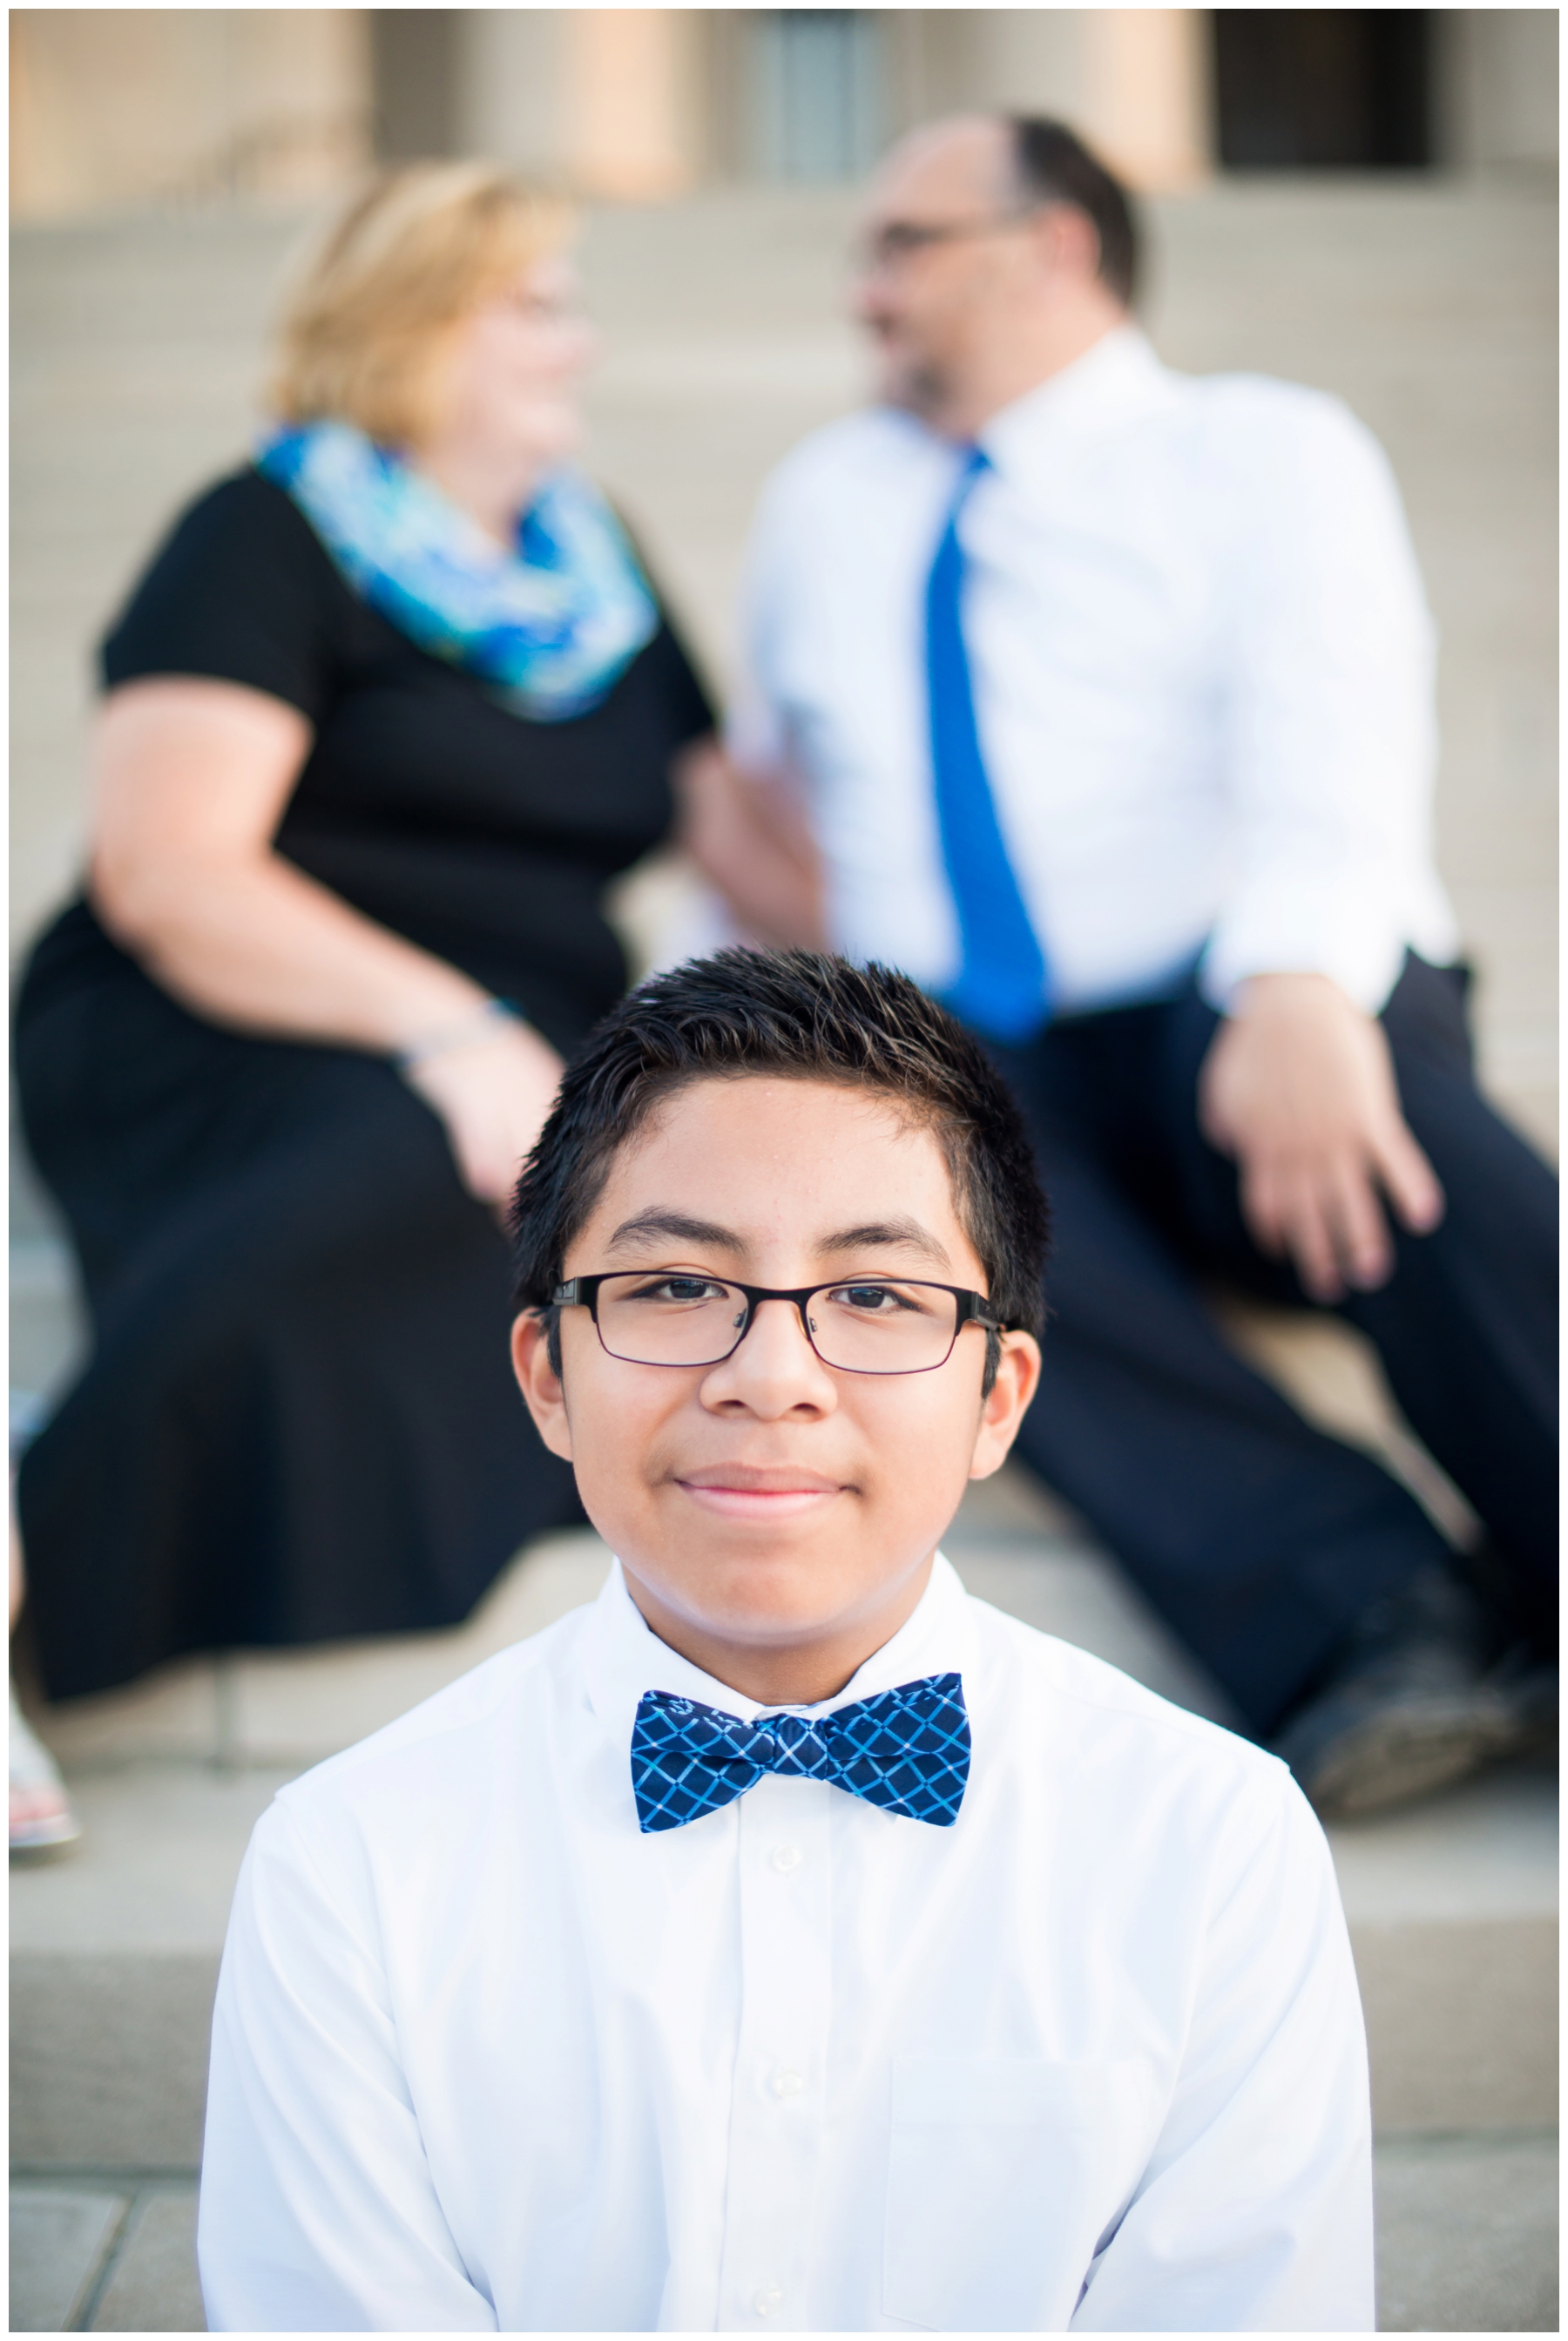 classy-bowtie-family-session-at-nelson-atkins-museum-by-lacey-rene-studios-photography_0003